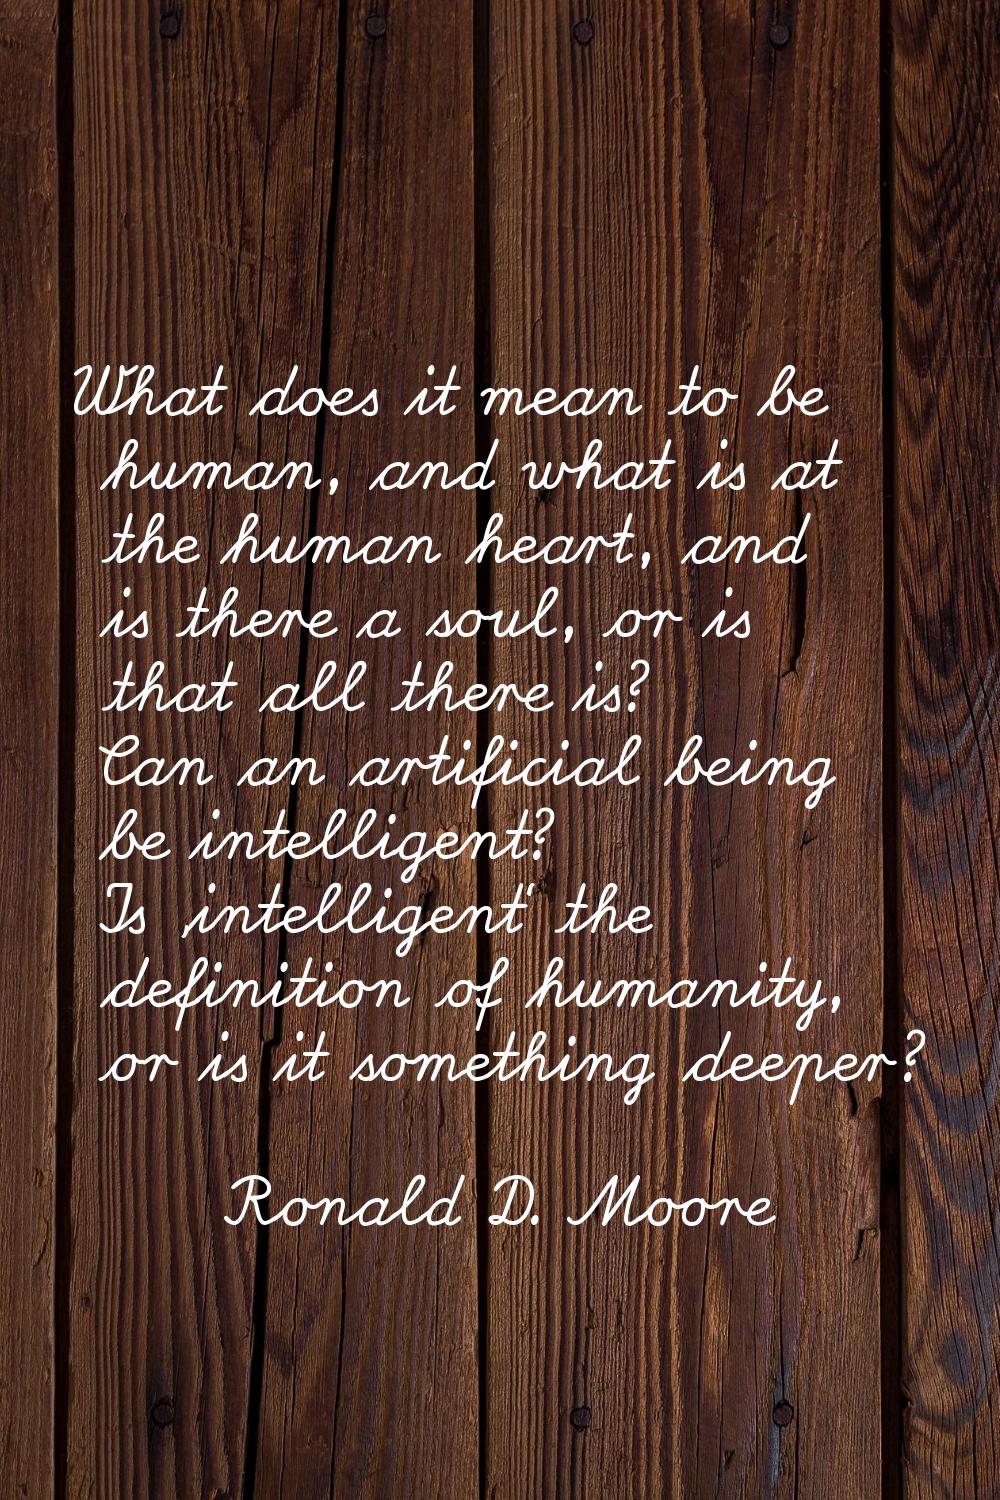 What does it mean to be human, and what is at the human heart, and is there a soul, or is that all 